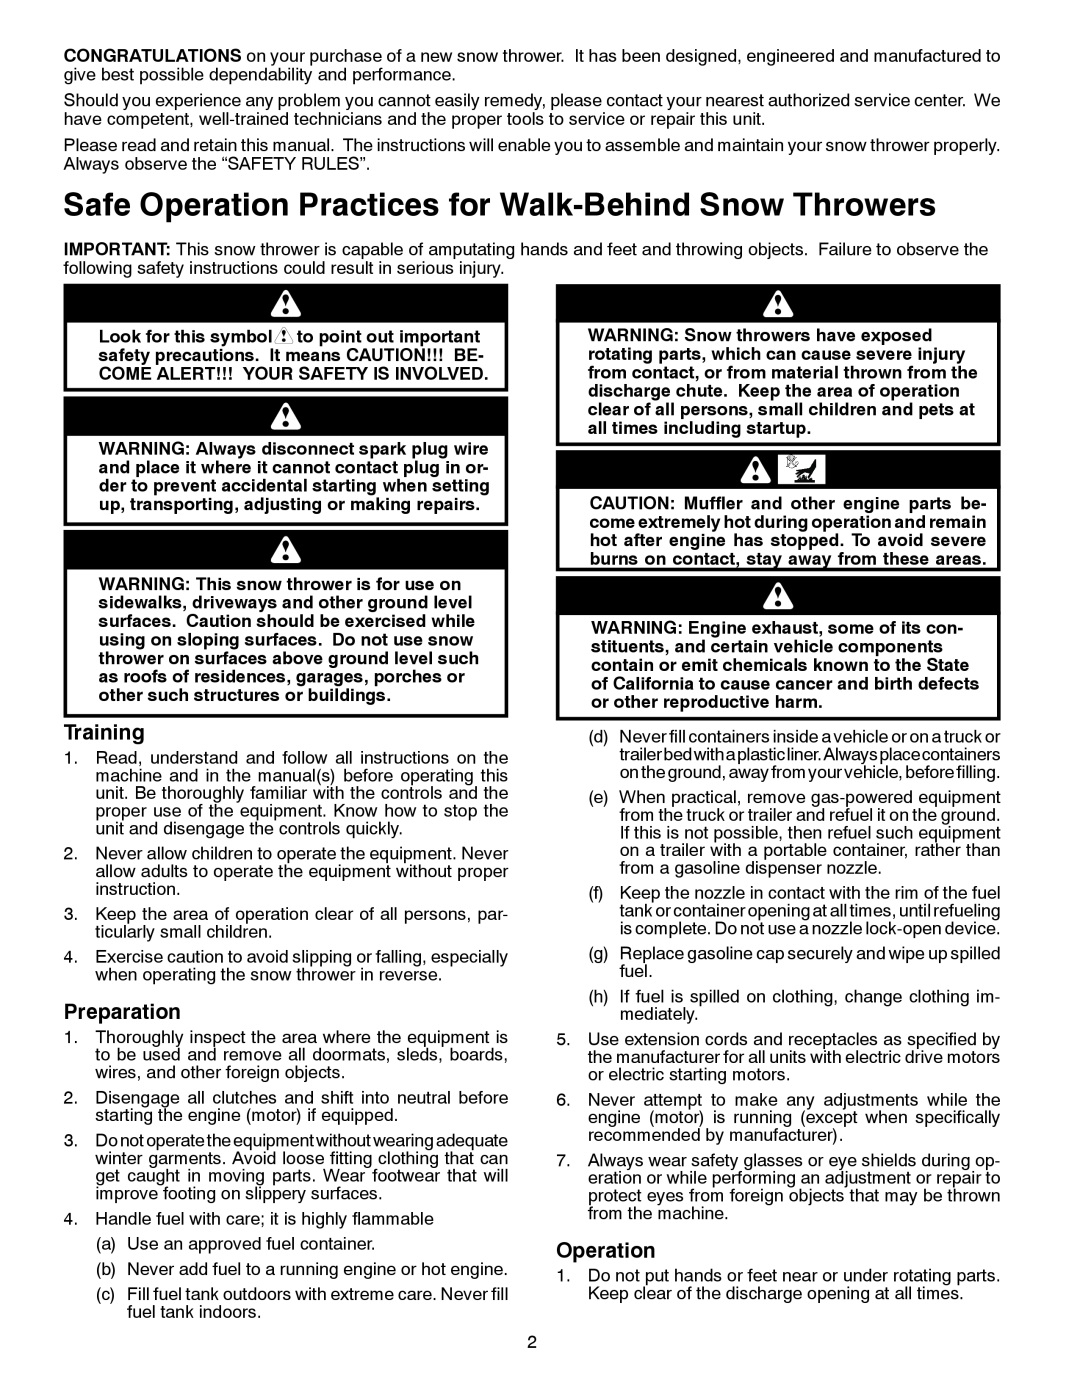 McCulloch MC621, 96182000500 owner manual Safe Operation Practices for Walk-Behind Snow Throwers, Training, Preparation 